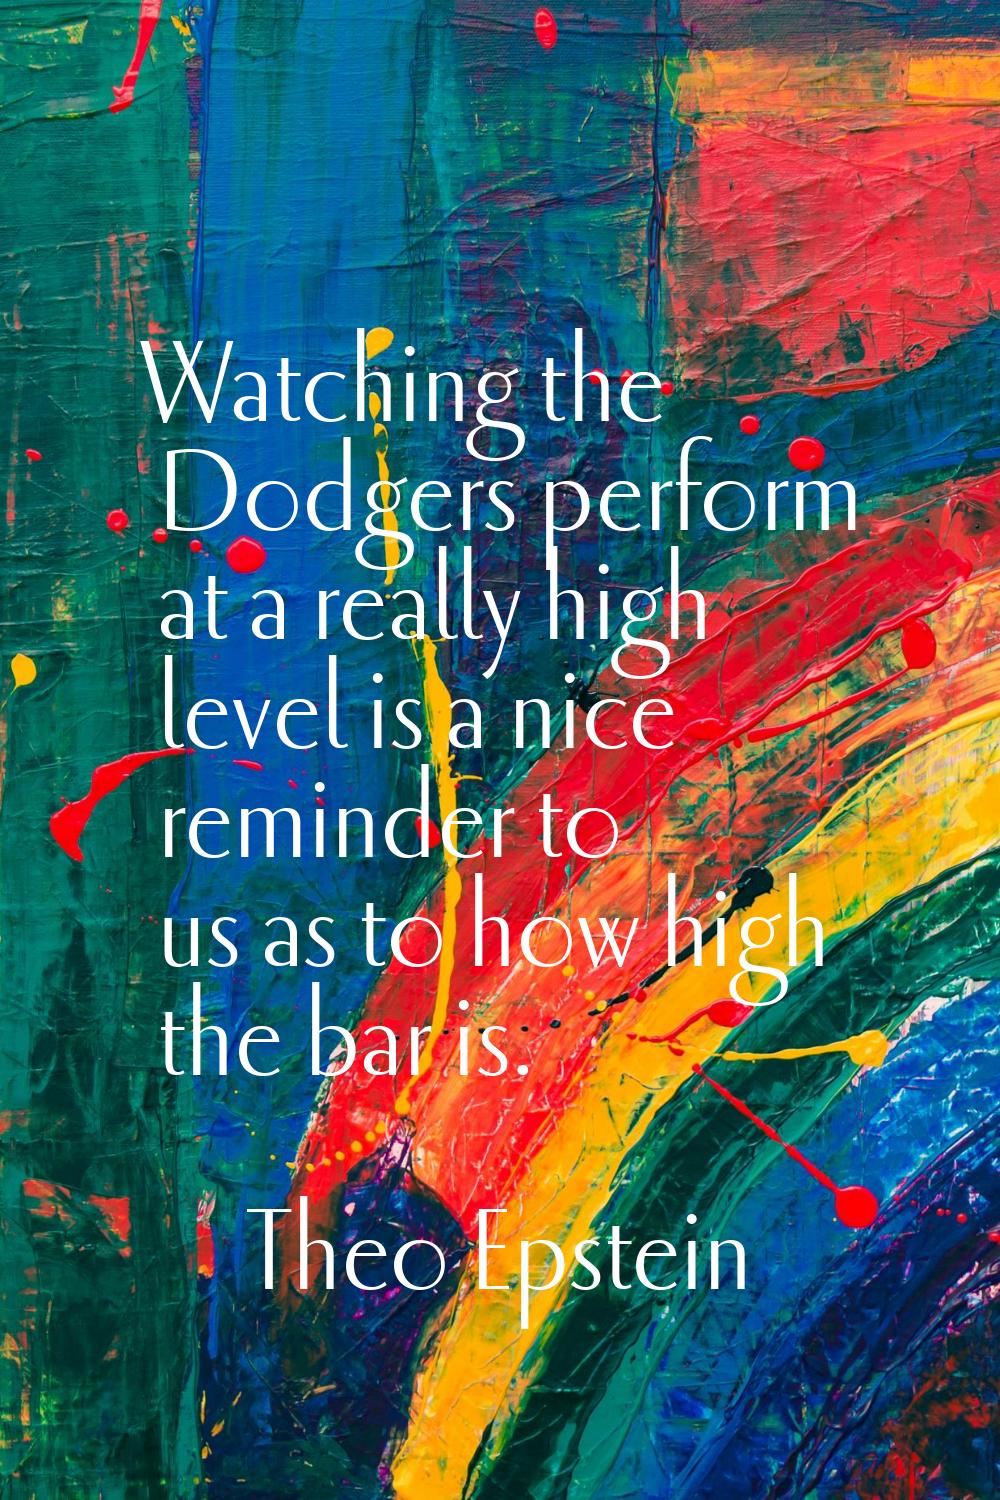 Watching the Dodgers perform at a really high level is a nice reminder to us as to how high the bar